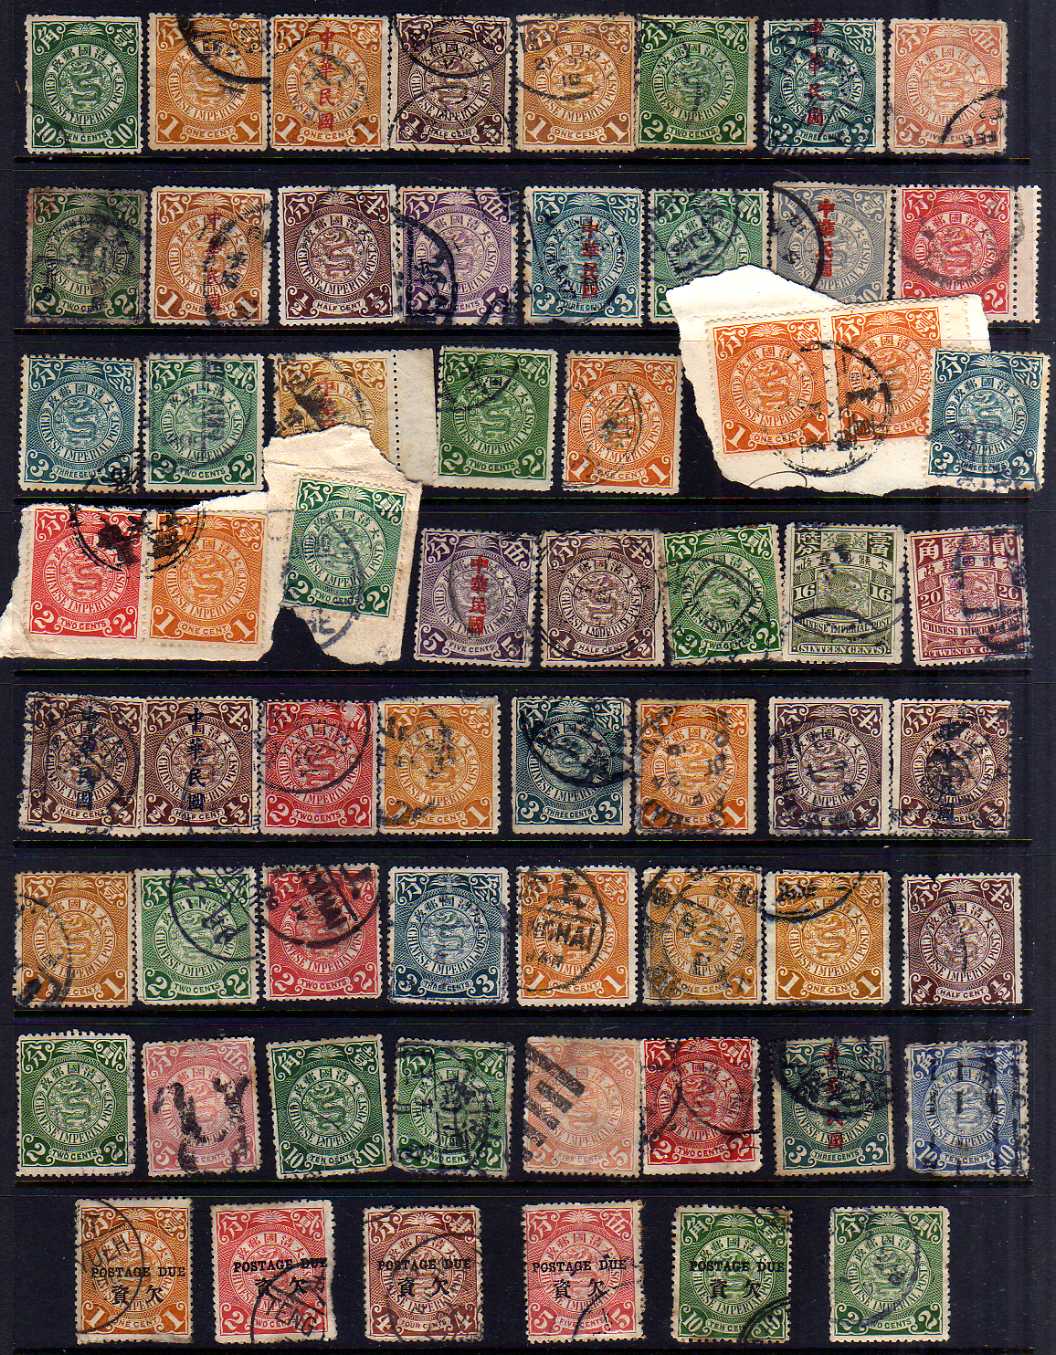 CHINA: 1898-1912 COILING DRAGONS USED ON TWO HAGNERS, INCLUDING POSTMARKS, POSTAGE DUE, ETC.